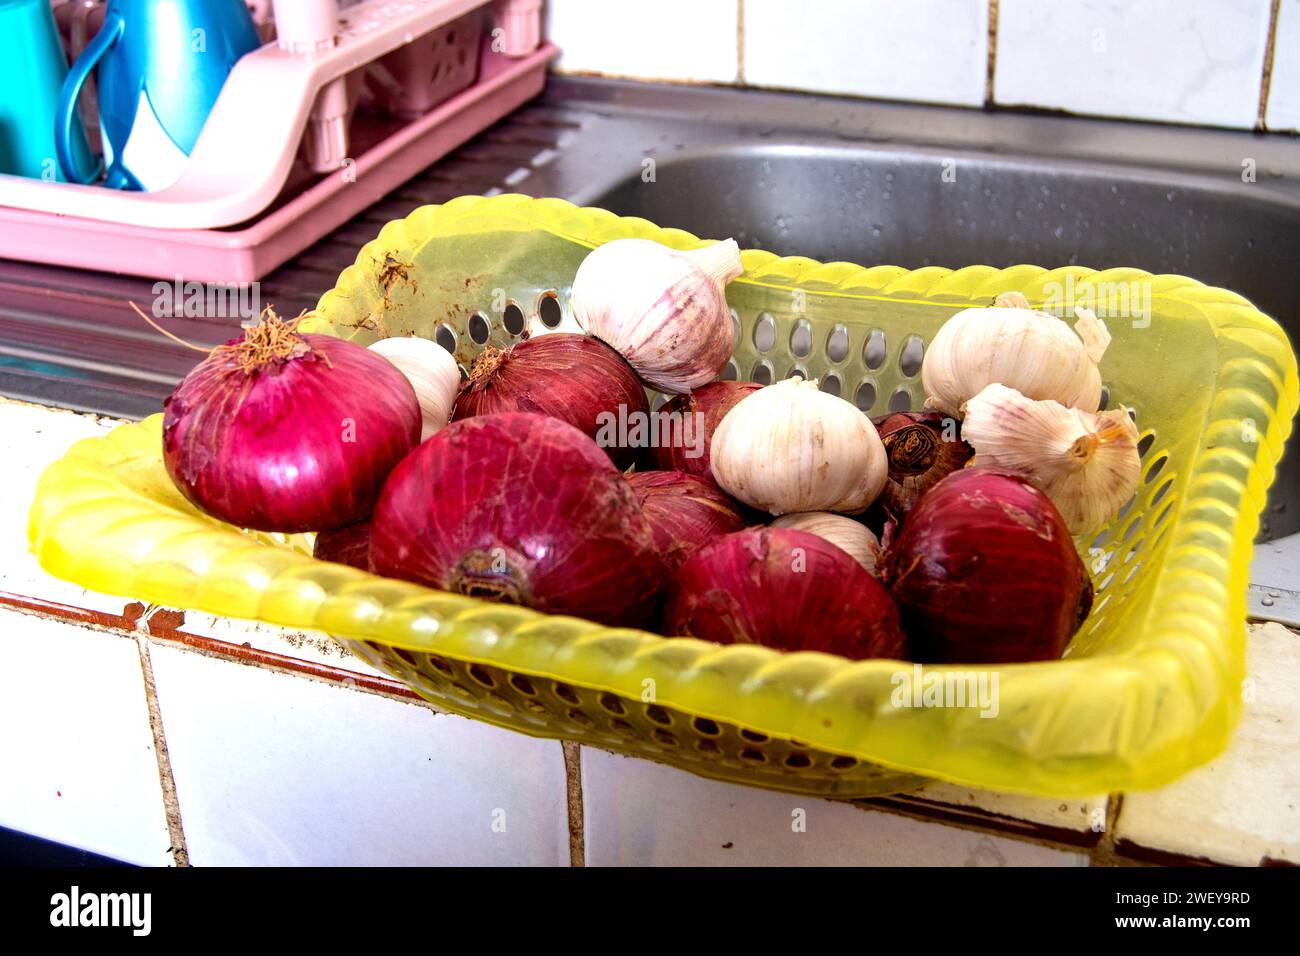 a basket on the kitchen sink containing onions and garlic. Stock Photo